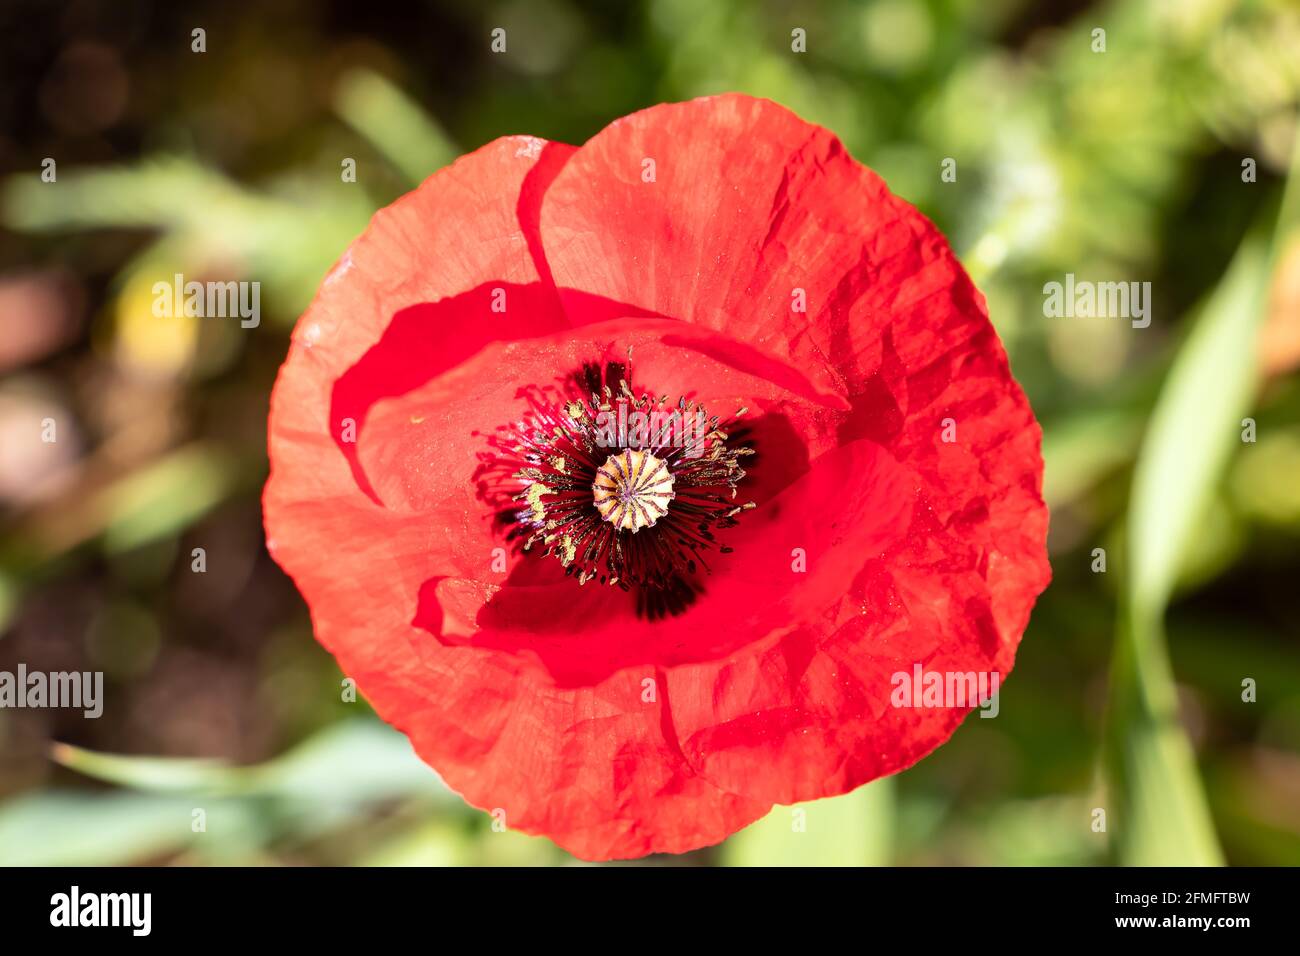 Papaver rhoeas, common names are common or corn poppy, corn rose, field poppy, Flanders poppy, and red poppy, is an annual herbaceous species of flow Stock Photo